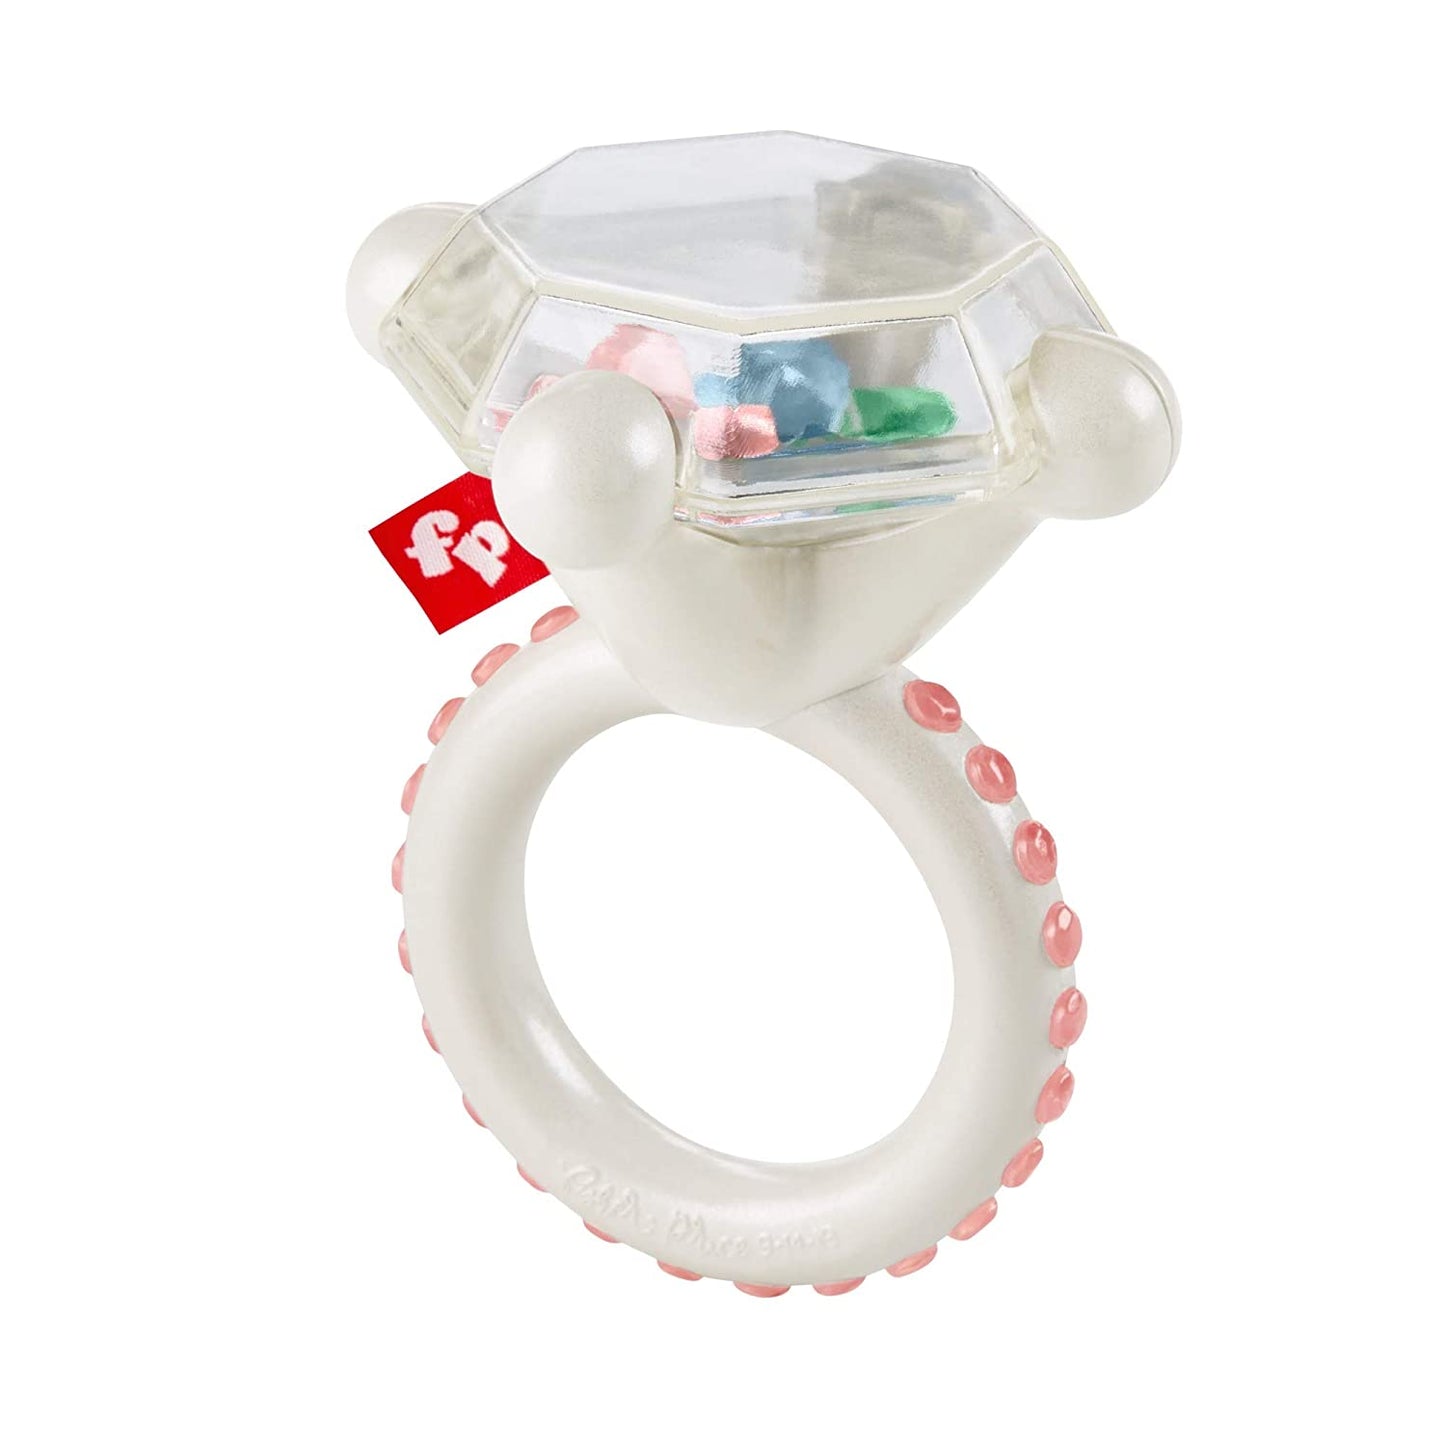 Fisher-Price Rock ‘n Rattle Teether Ring, Baby Rattle and Teething Toy